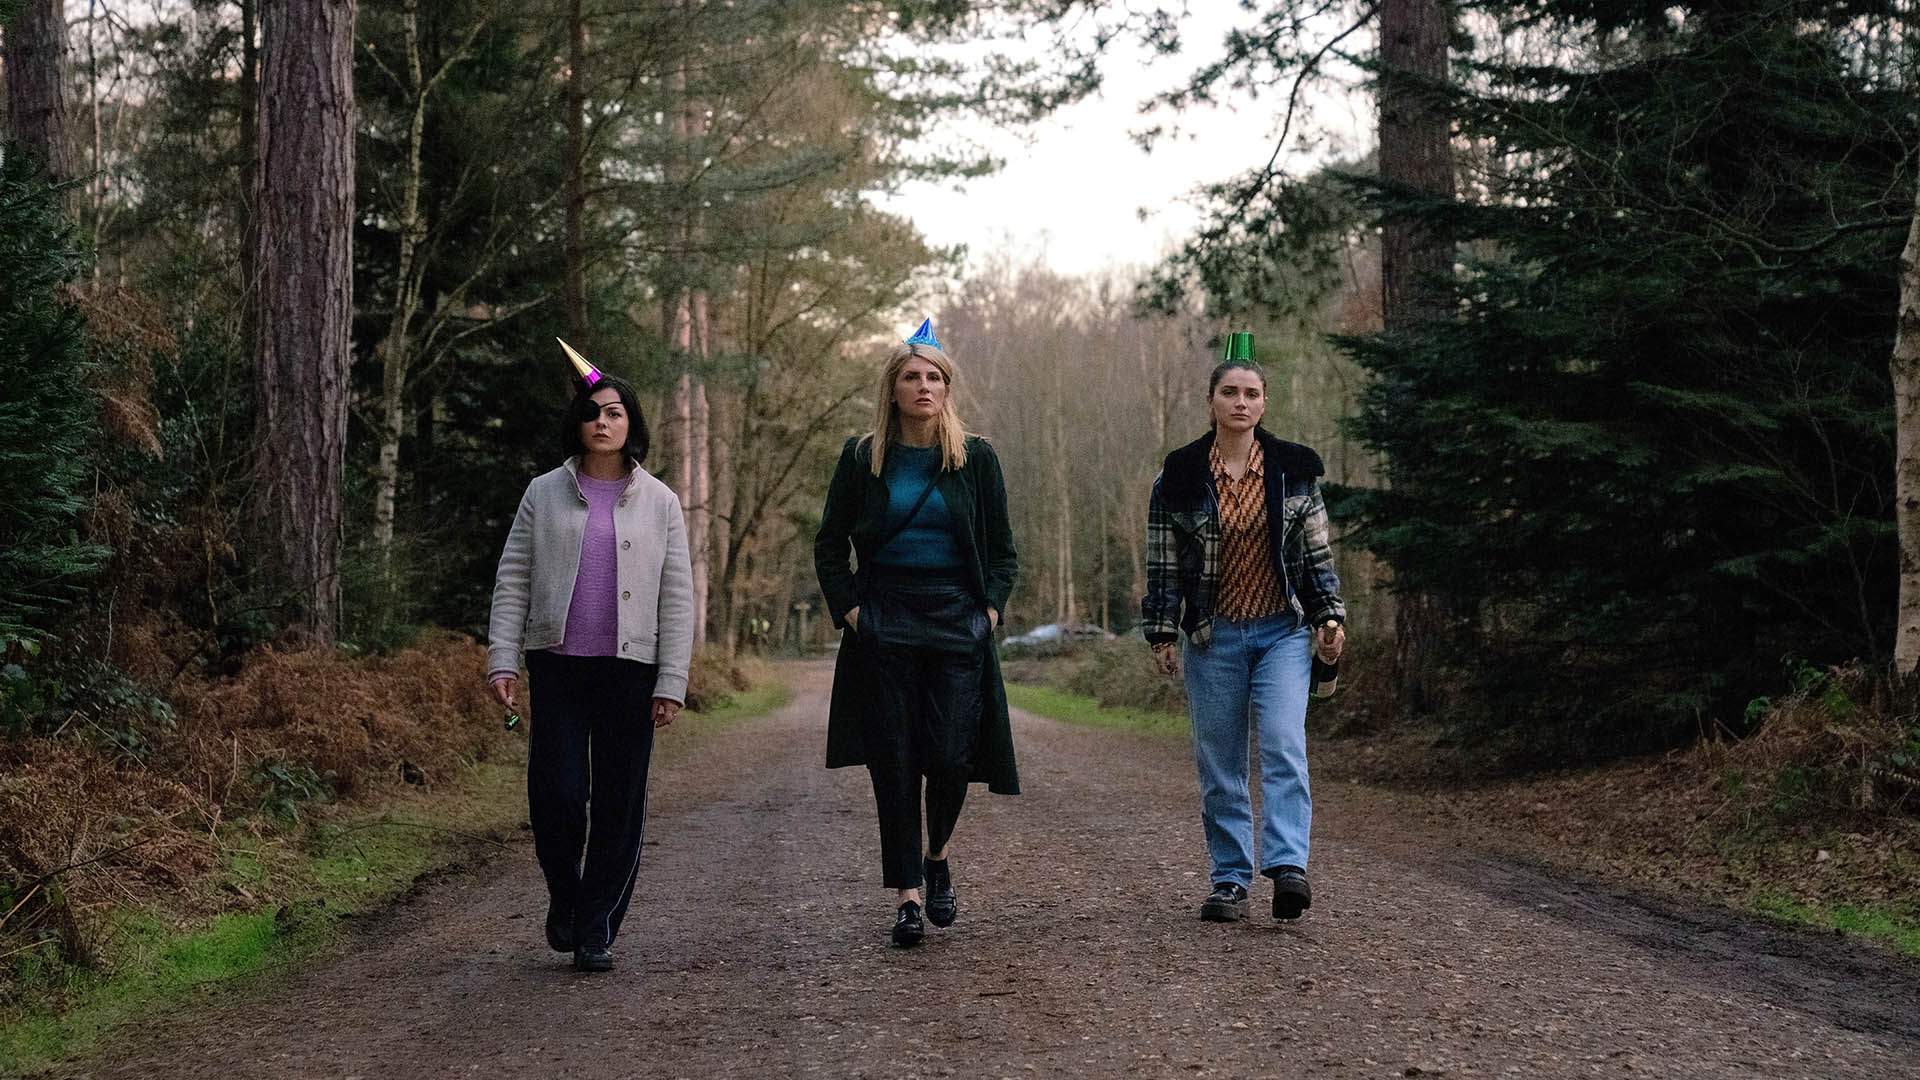 Irish Delight 'Bad Sisters' Is Your New Murder-Mystery (and Pitch-Black Comedy) Obsession